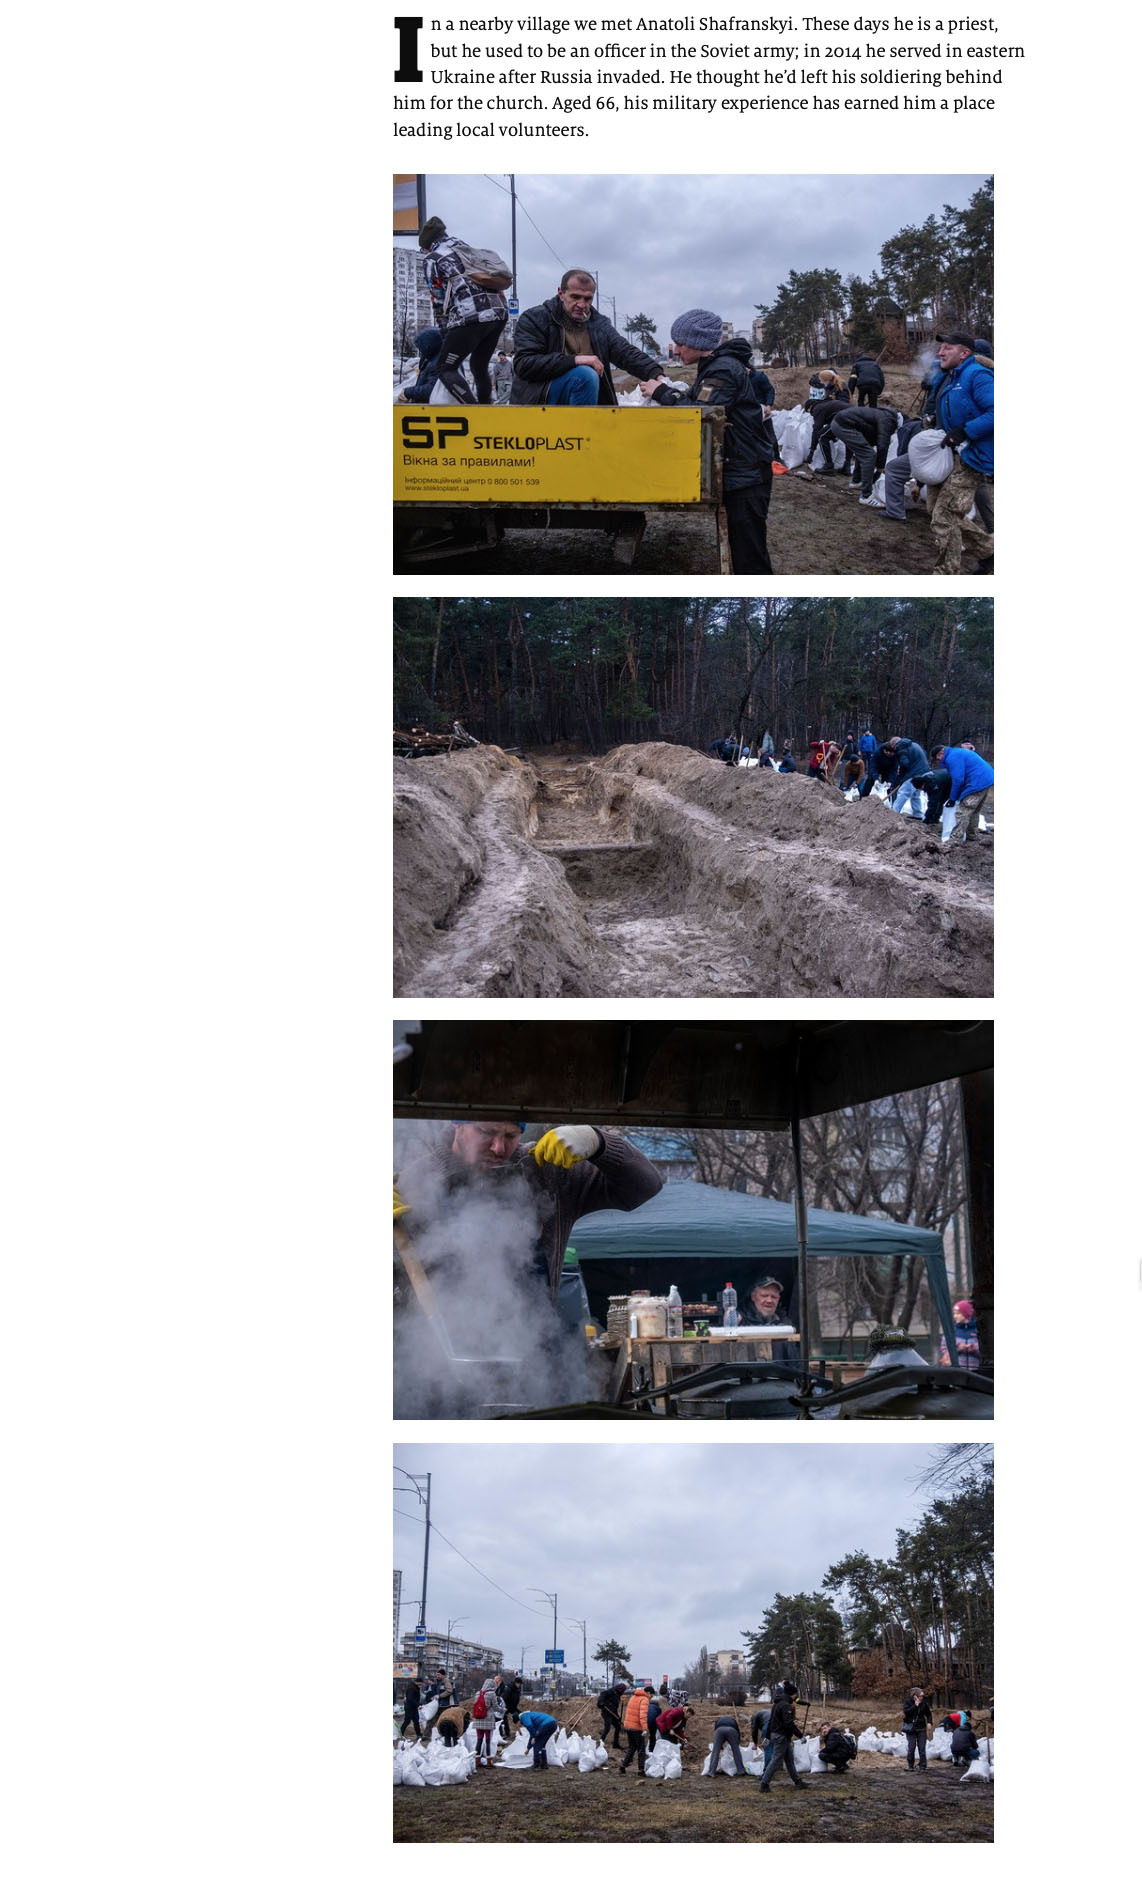 Photos by Ron Haviv / VII of older men in Ukraine volunteering for the Ukrainian military to look for Russian saboteurs, in The Economist 1843 magazine, March 4, 2022.